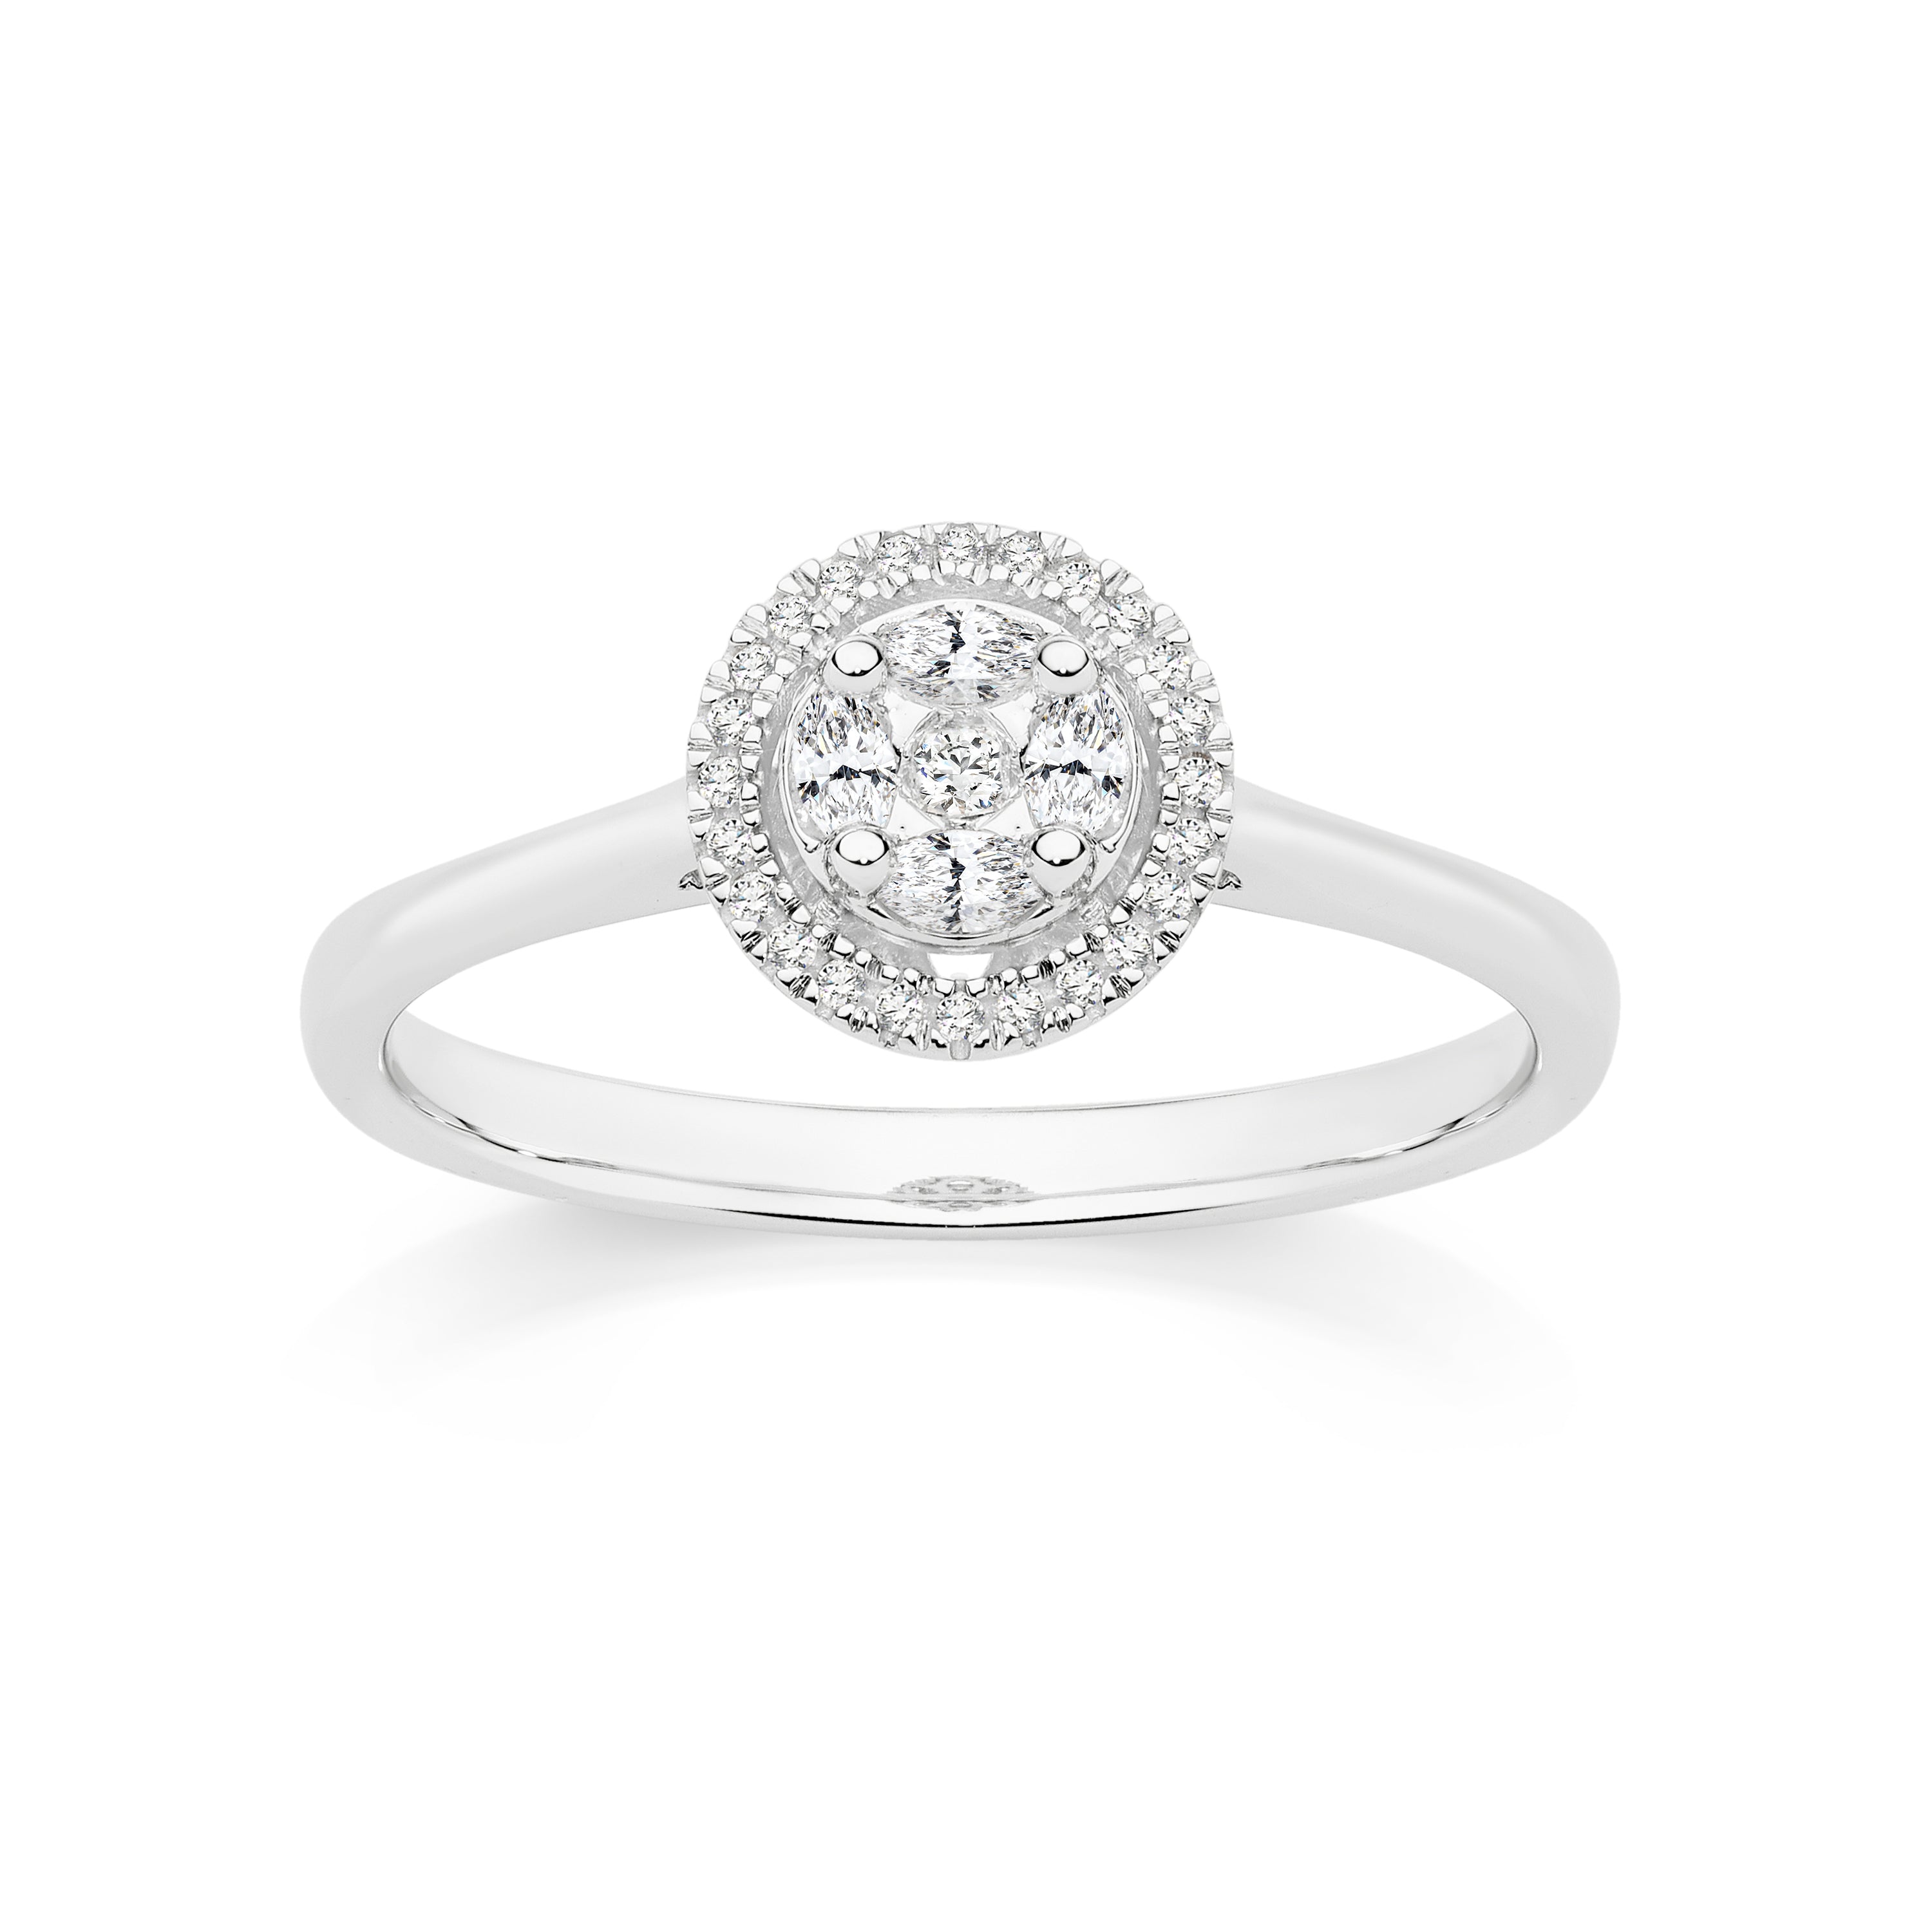 9ct white gold 0.25ct diamond halo ring with princess & marquise stones